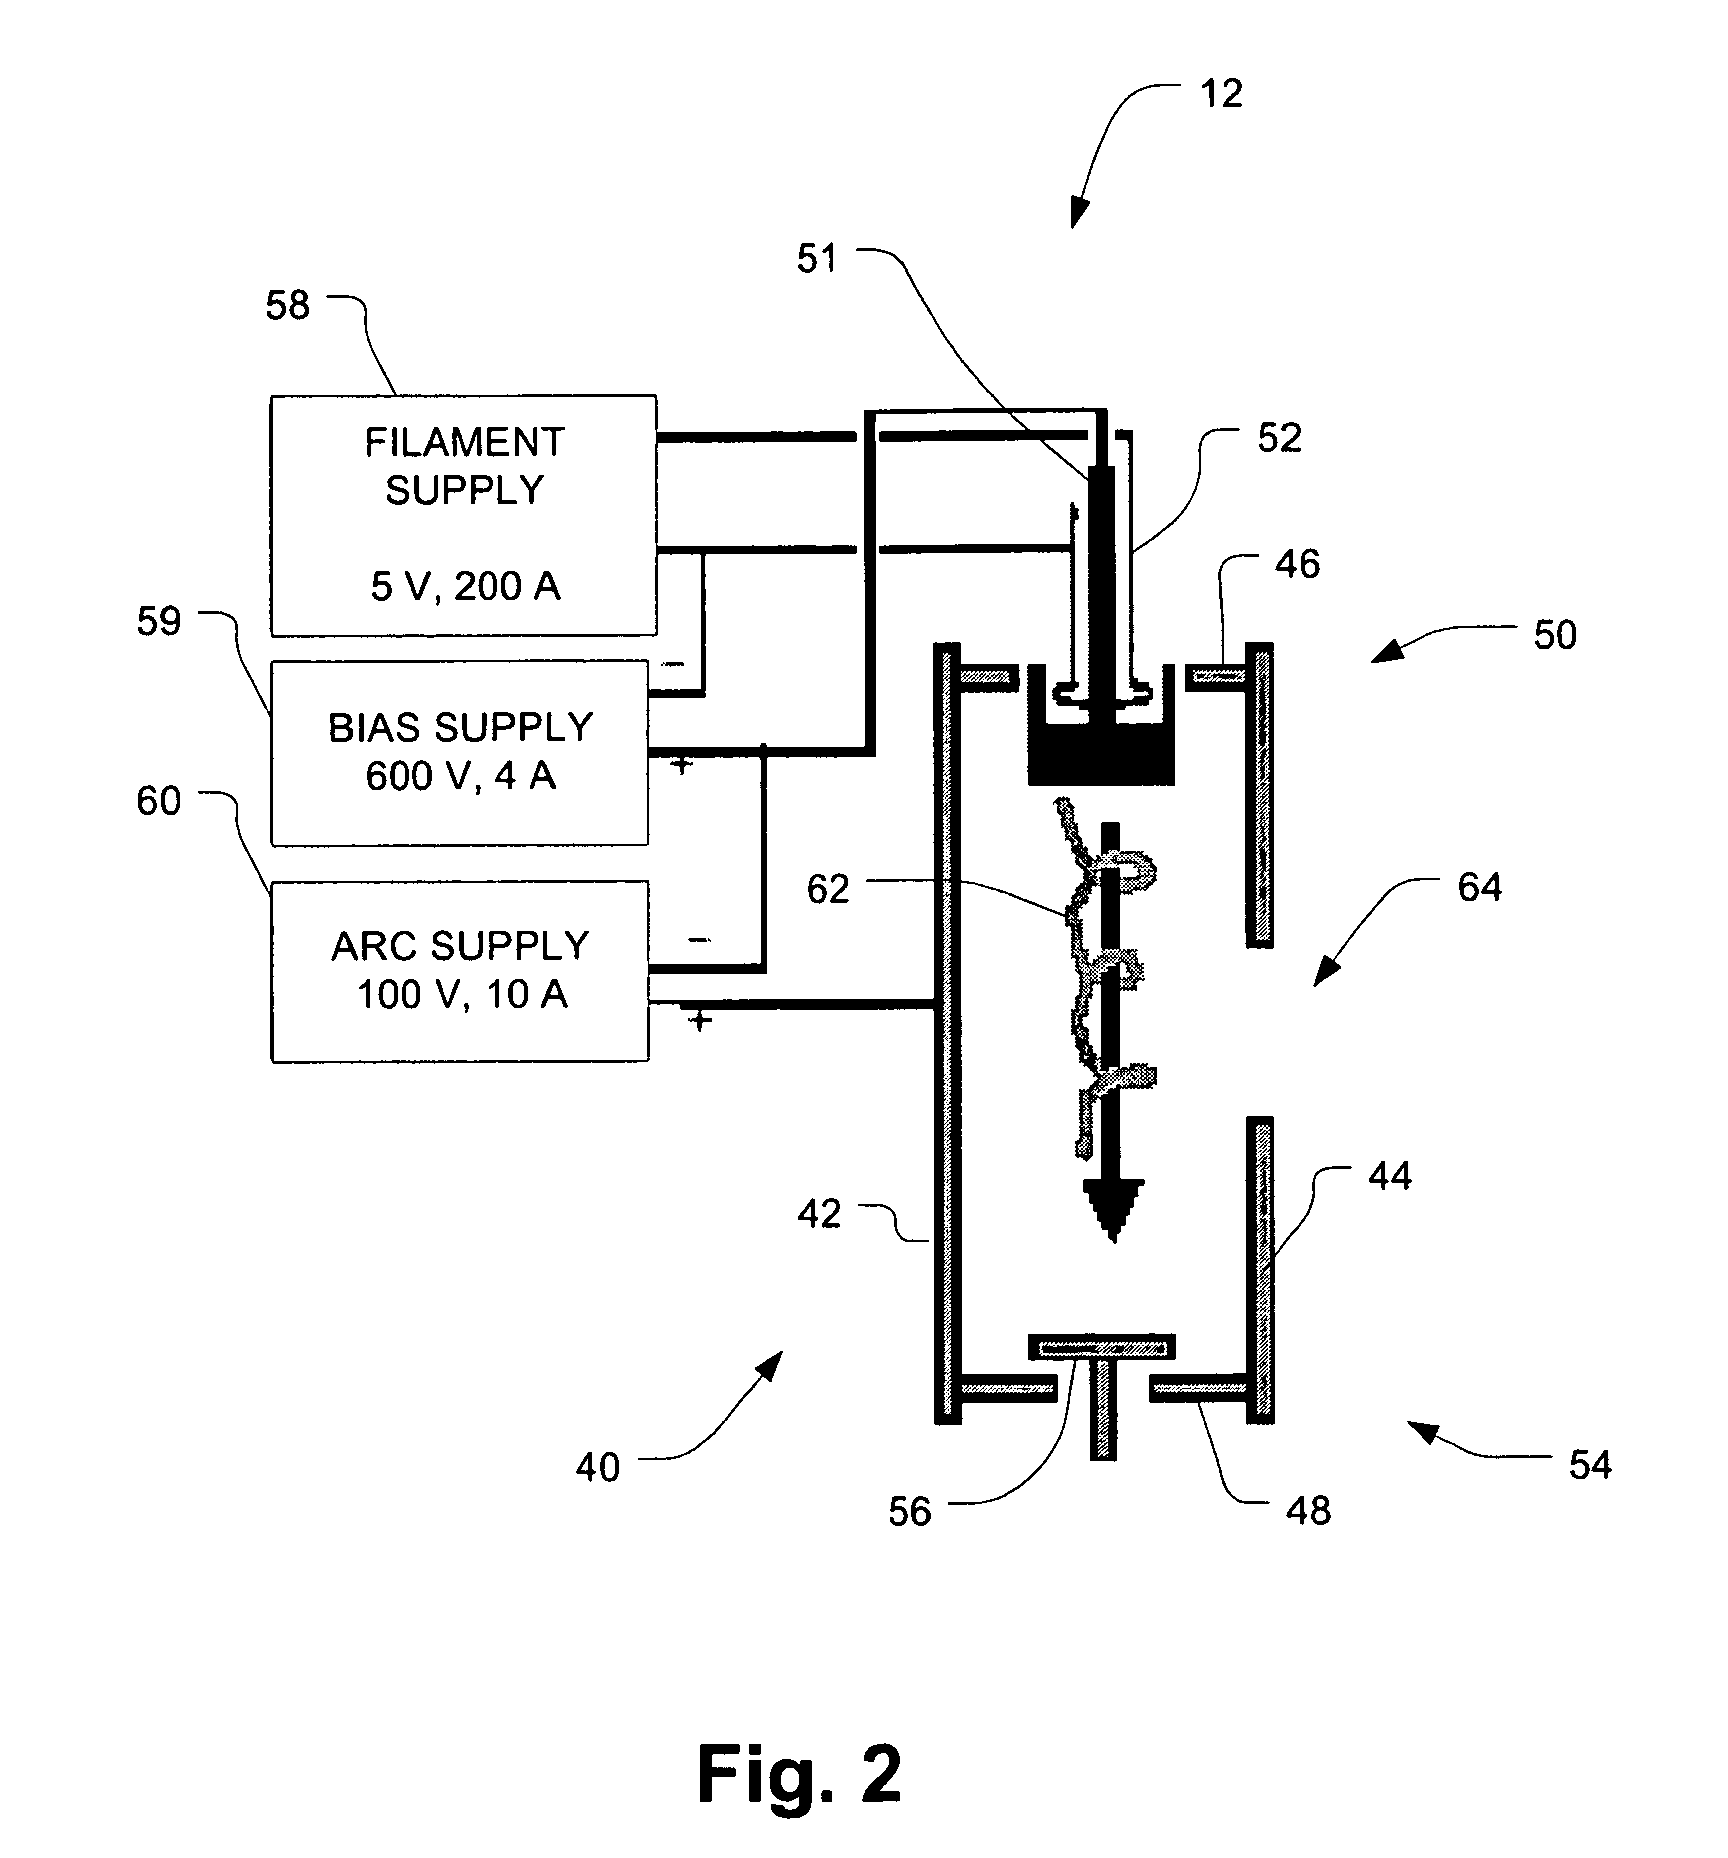 Source arc chamber for ion implanter having repeller electrode mounted to external insulator